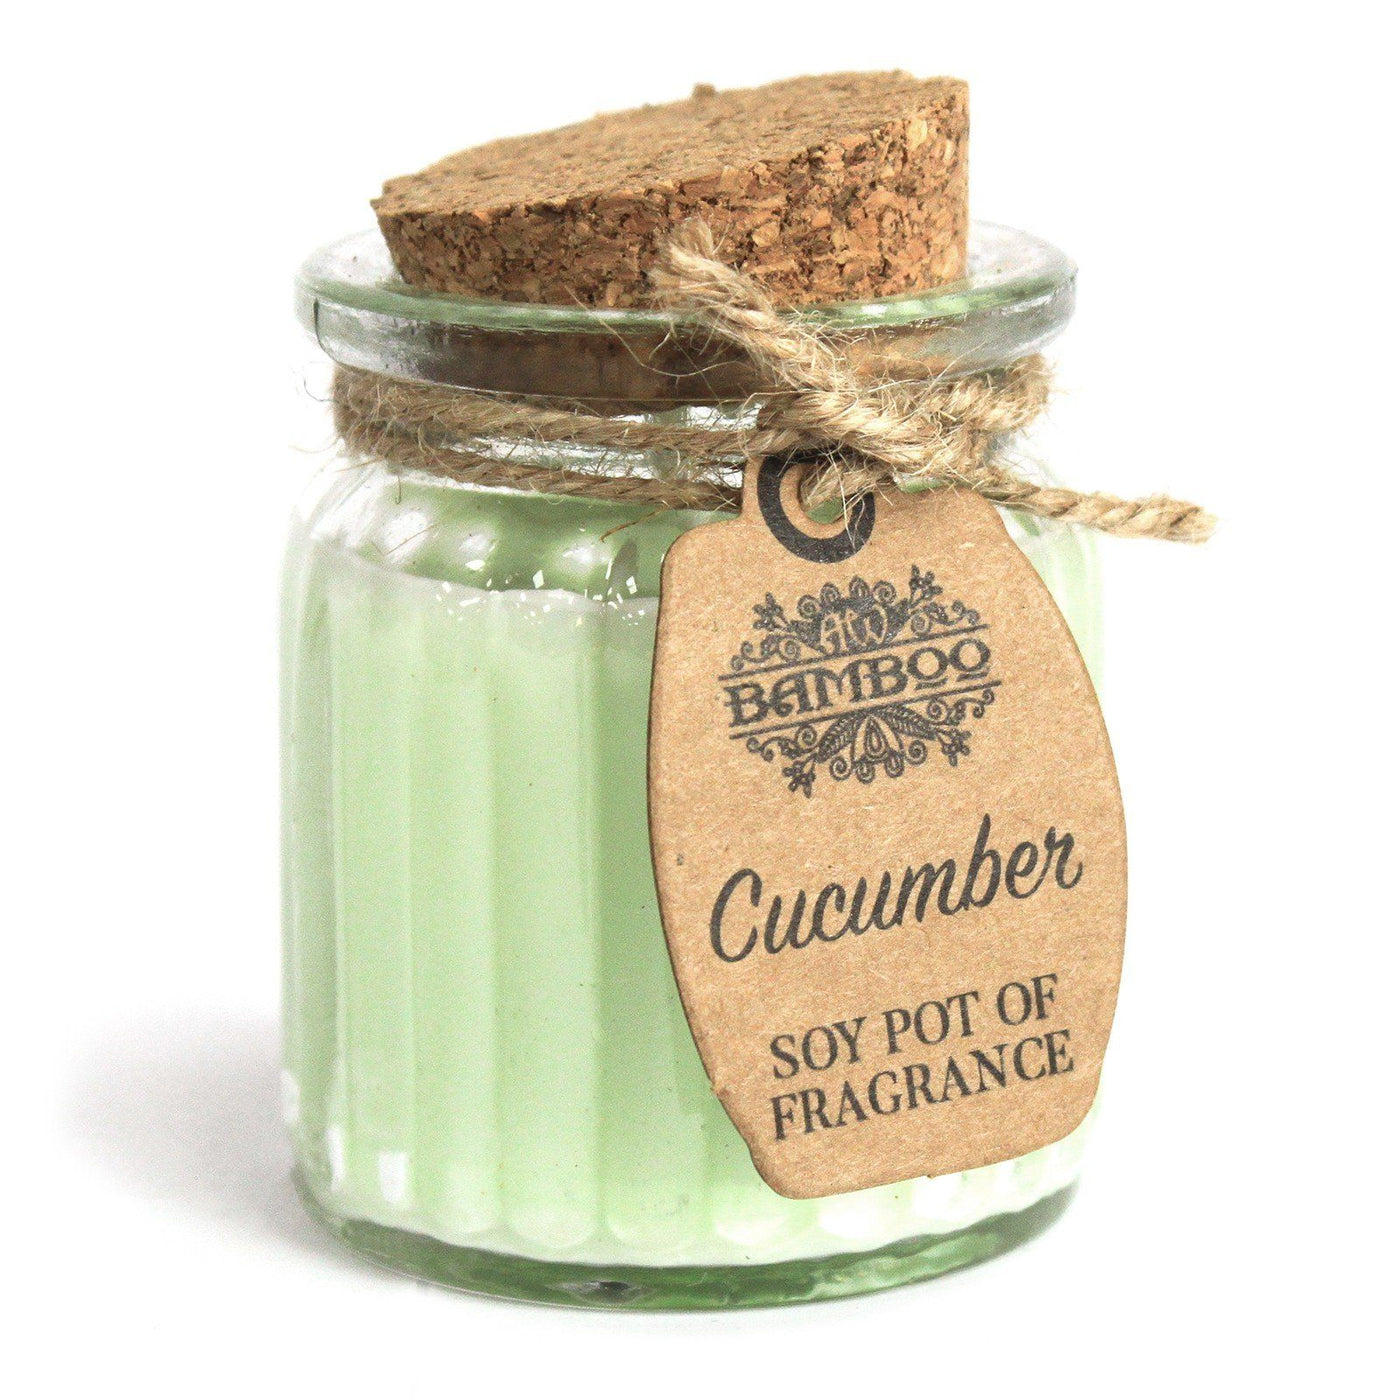 Set Of Two Cucumber Soy Pot of Fragrance Candles 20Hrs Burning Time - Light Green.  Grab these amazingly scented soy wax candle pots and enjoy the natural, smoother fragrance and long burning time.  The great thing about soy wax is that it has excellent fragrance-holding qualities and releases the fragrance evenly throughout the burning. Soybean candles burn cleaner, cooler and last longer than paraffin candles and also leave a minimal wax residue.